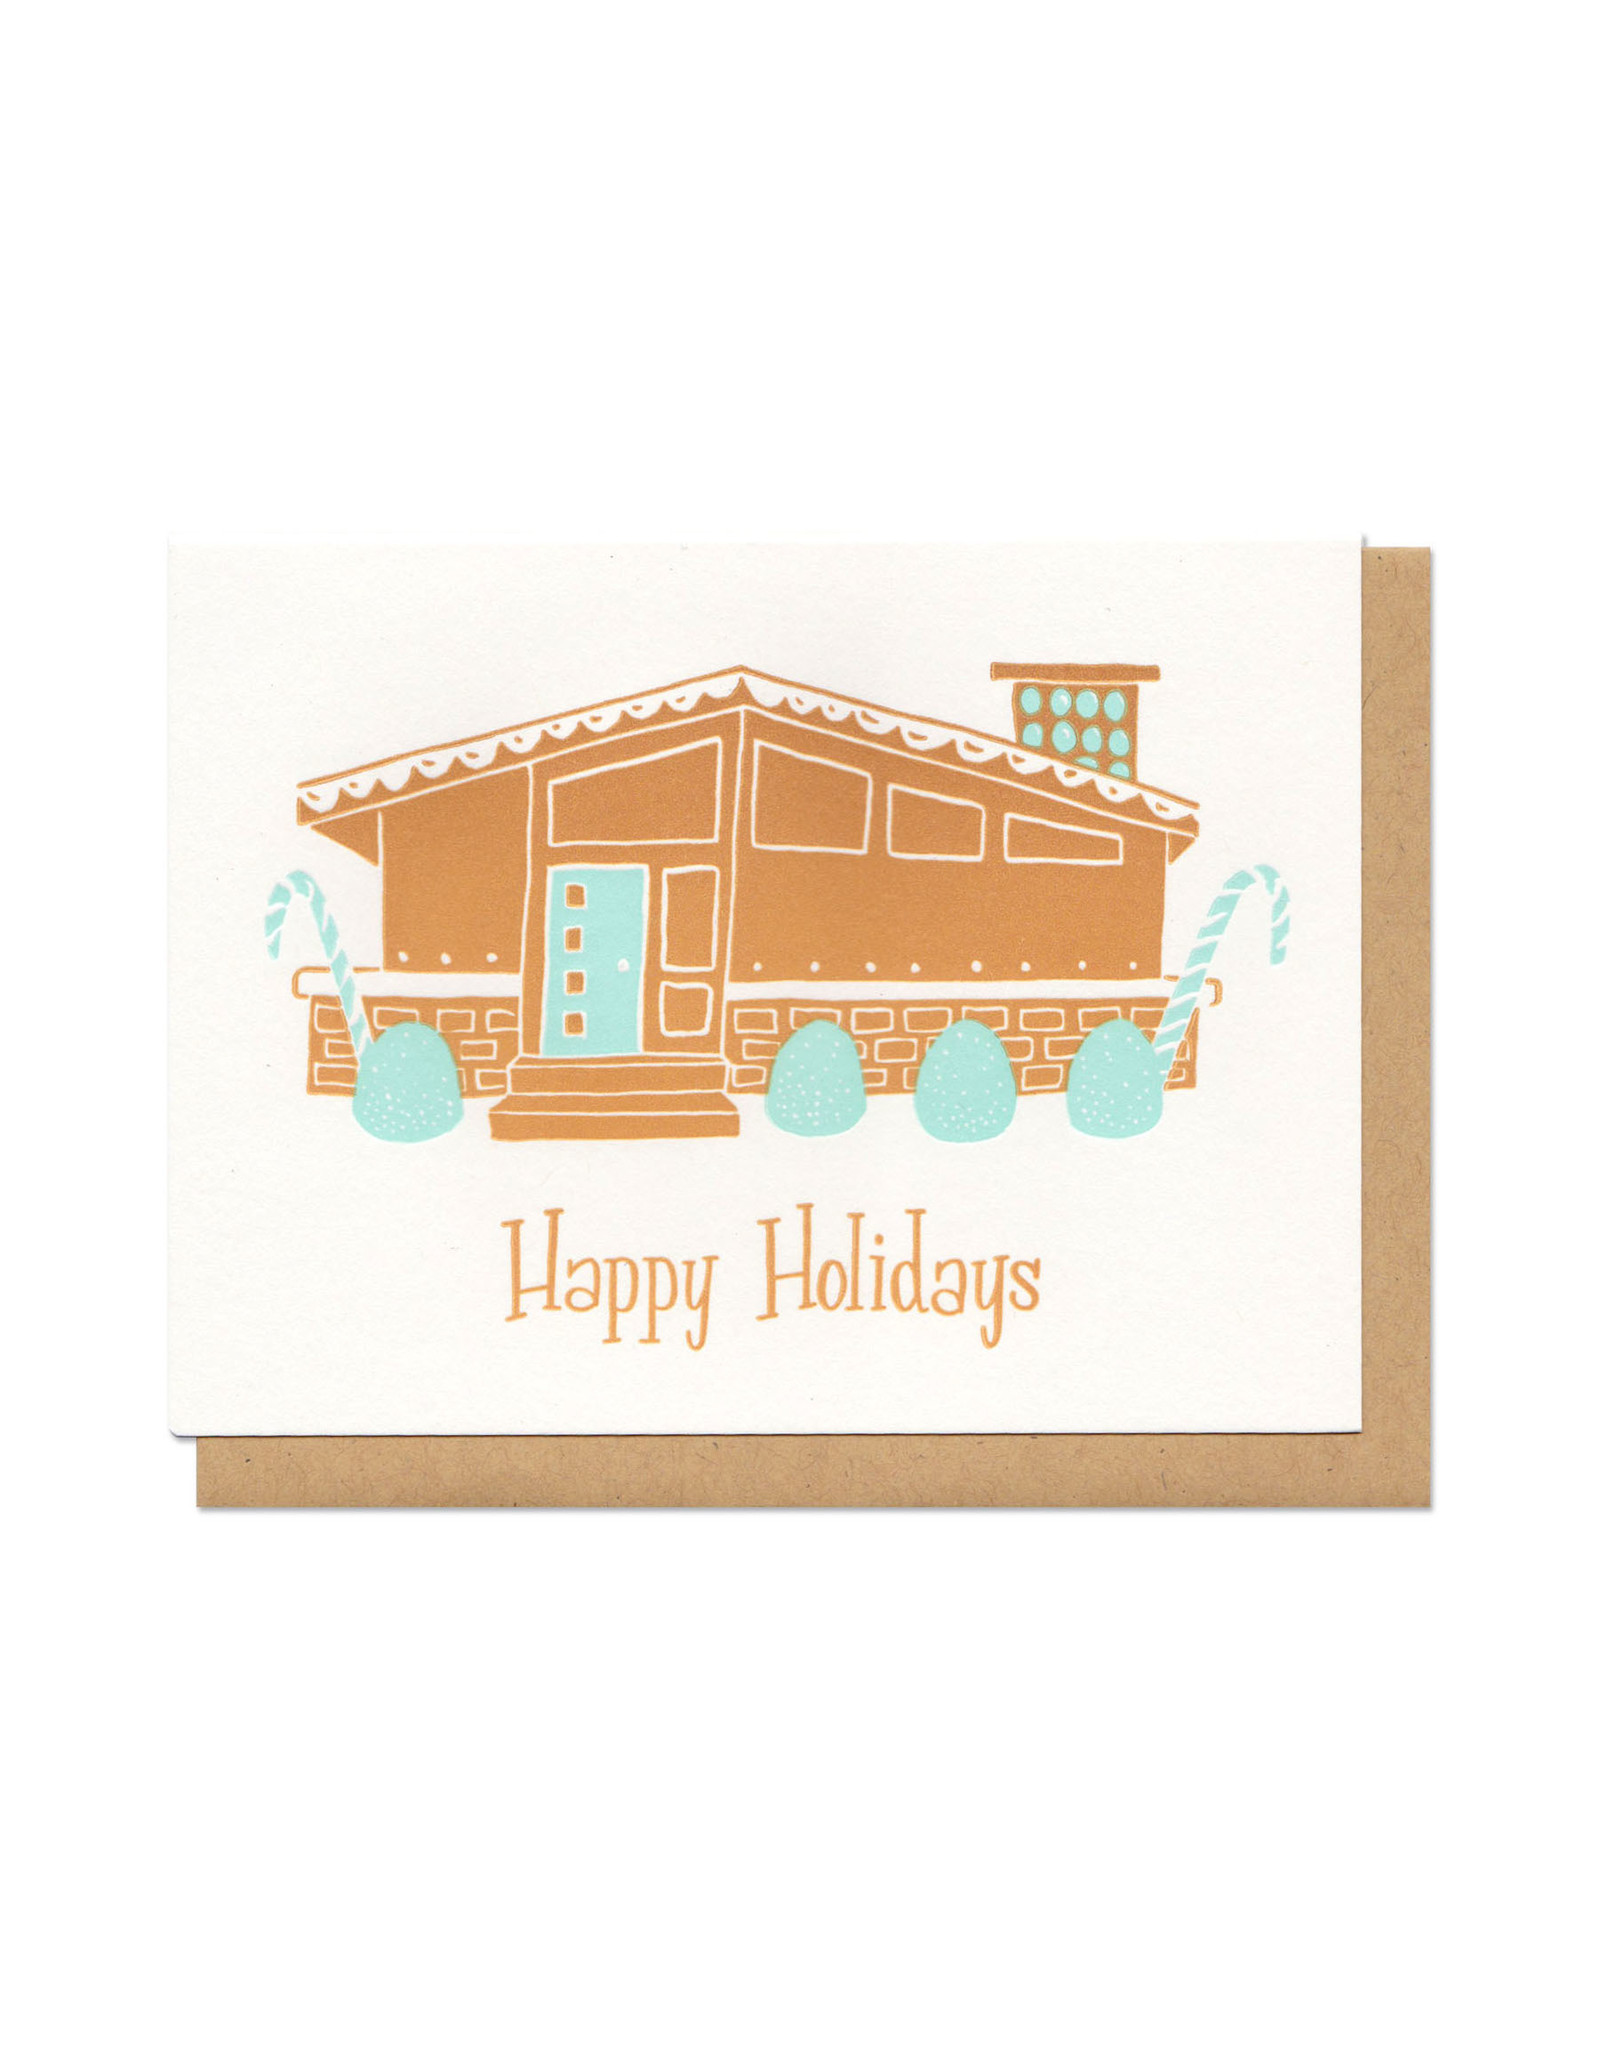 Gingerbread House “Happy Holidays” Greeting Card Boxed Set of 6